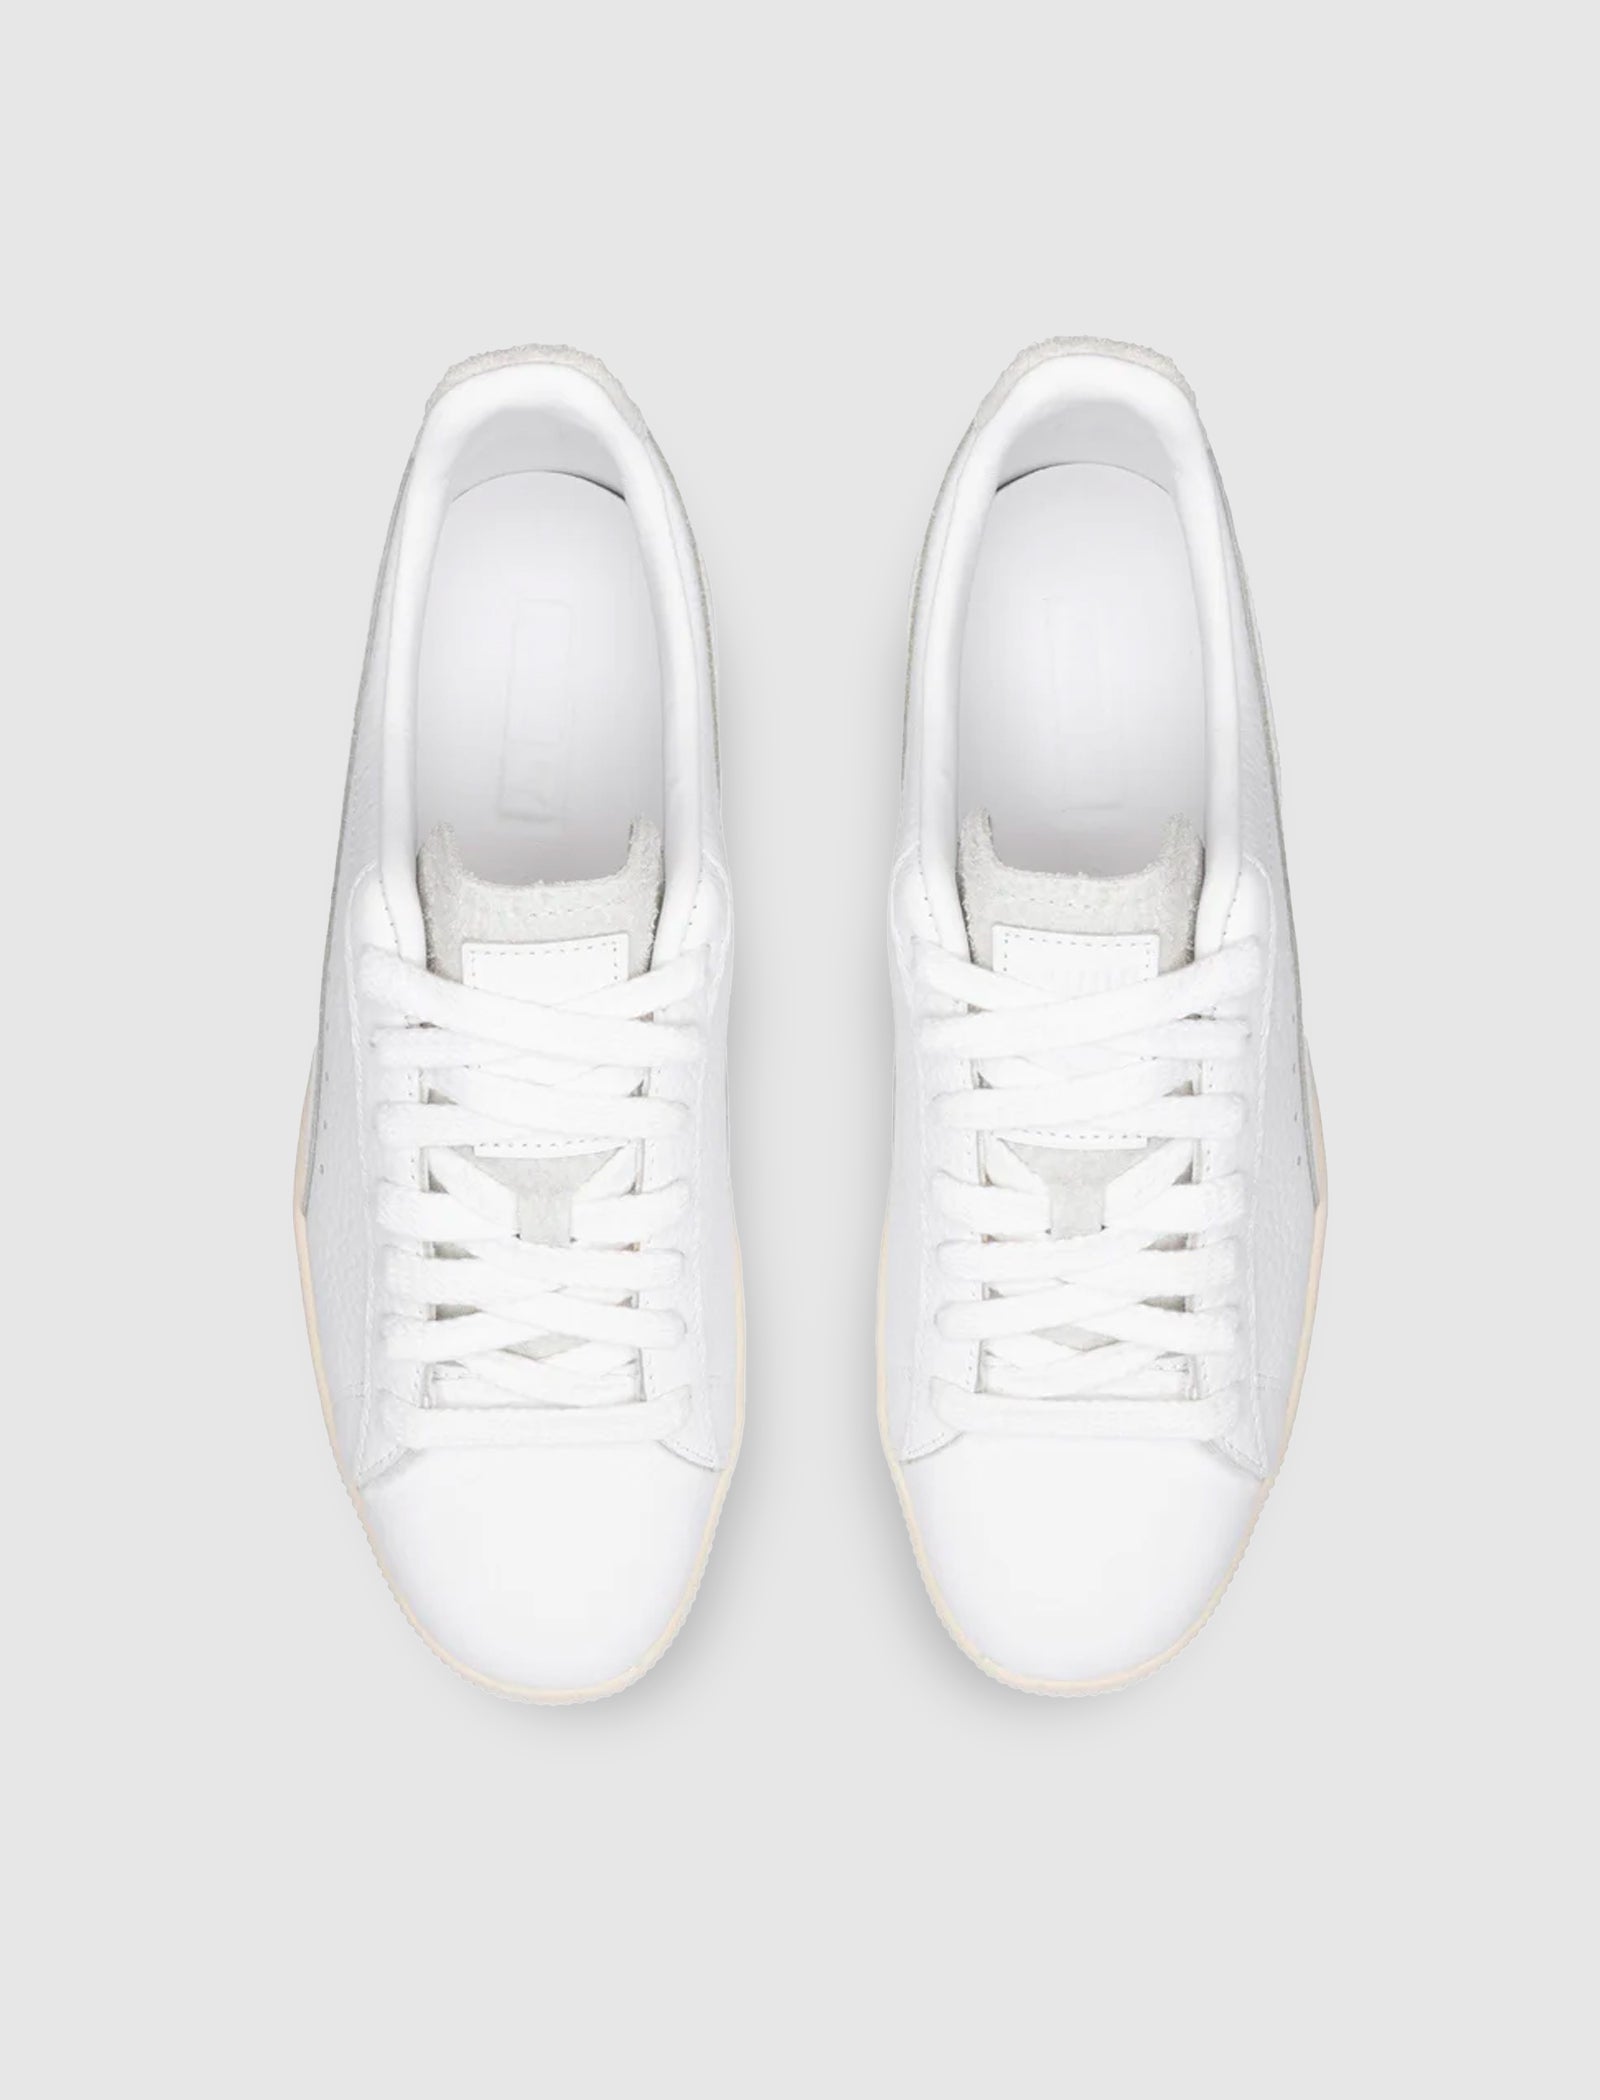 CLYDE PREMIUM "WHITE/FROSTED IVORY"